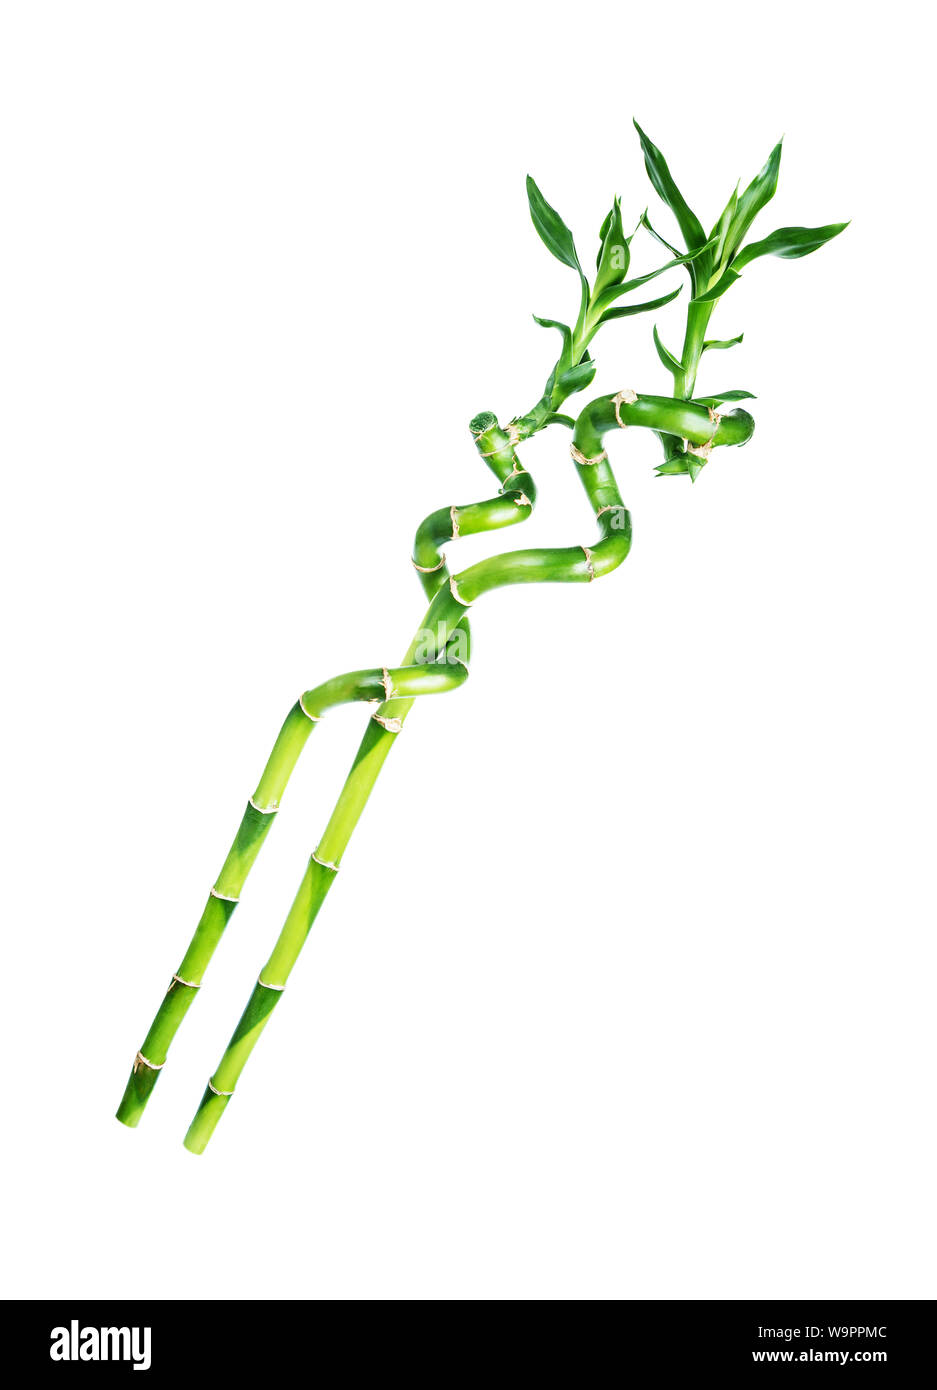 Two Long houseplant stem of Lucky Bamboo (Dracaena Sanderiana) with green leaves, twisted into a spiral shape, isolated on white background Stock Photo